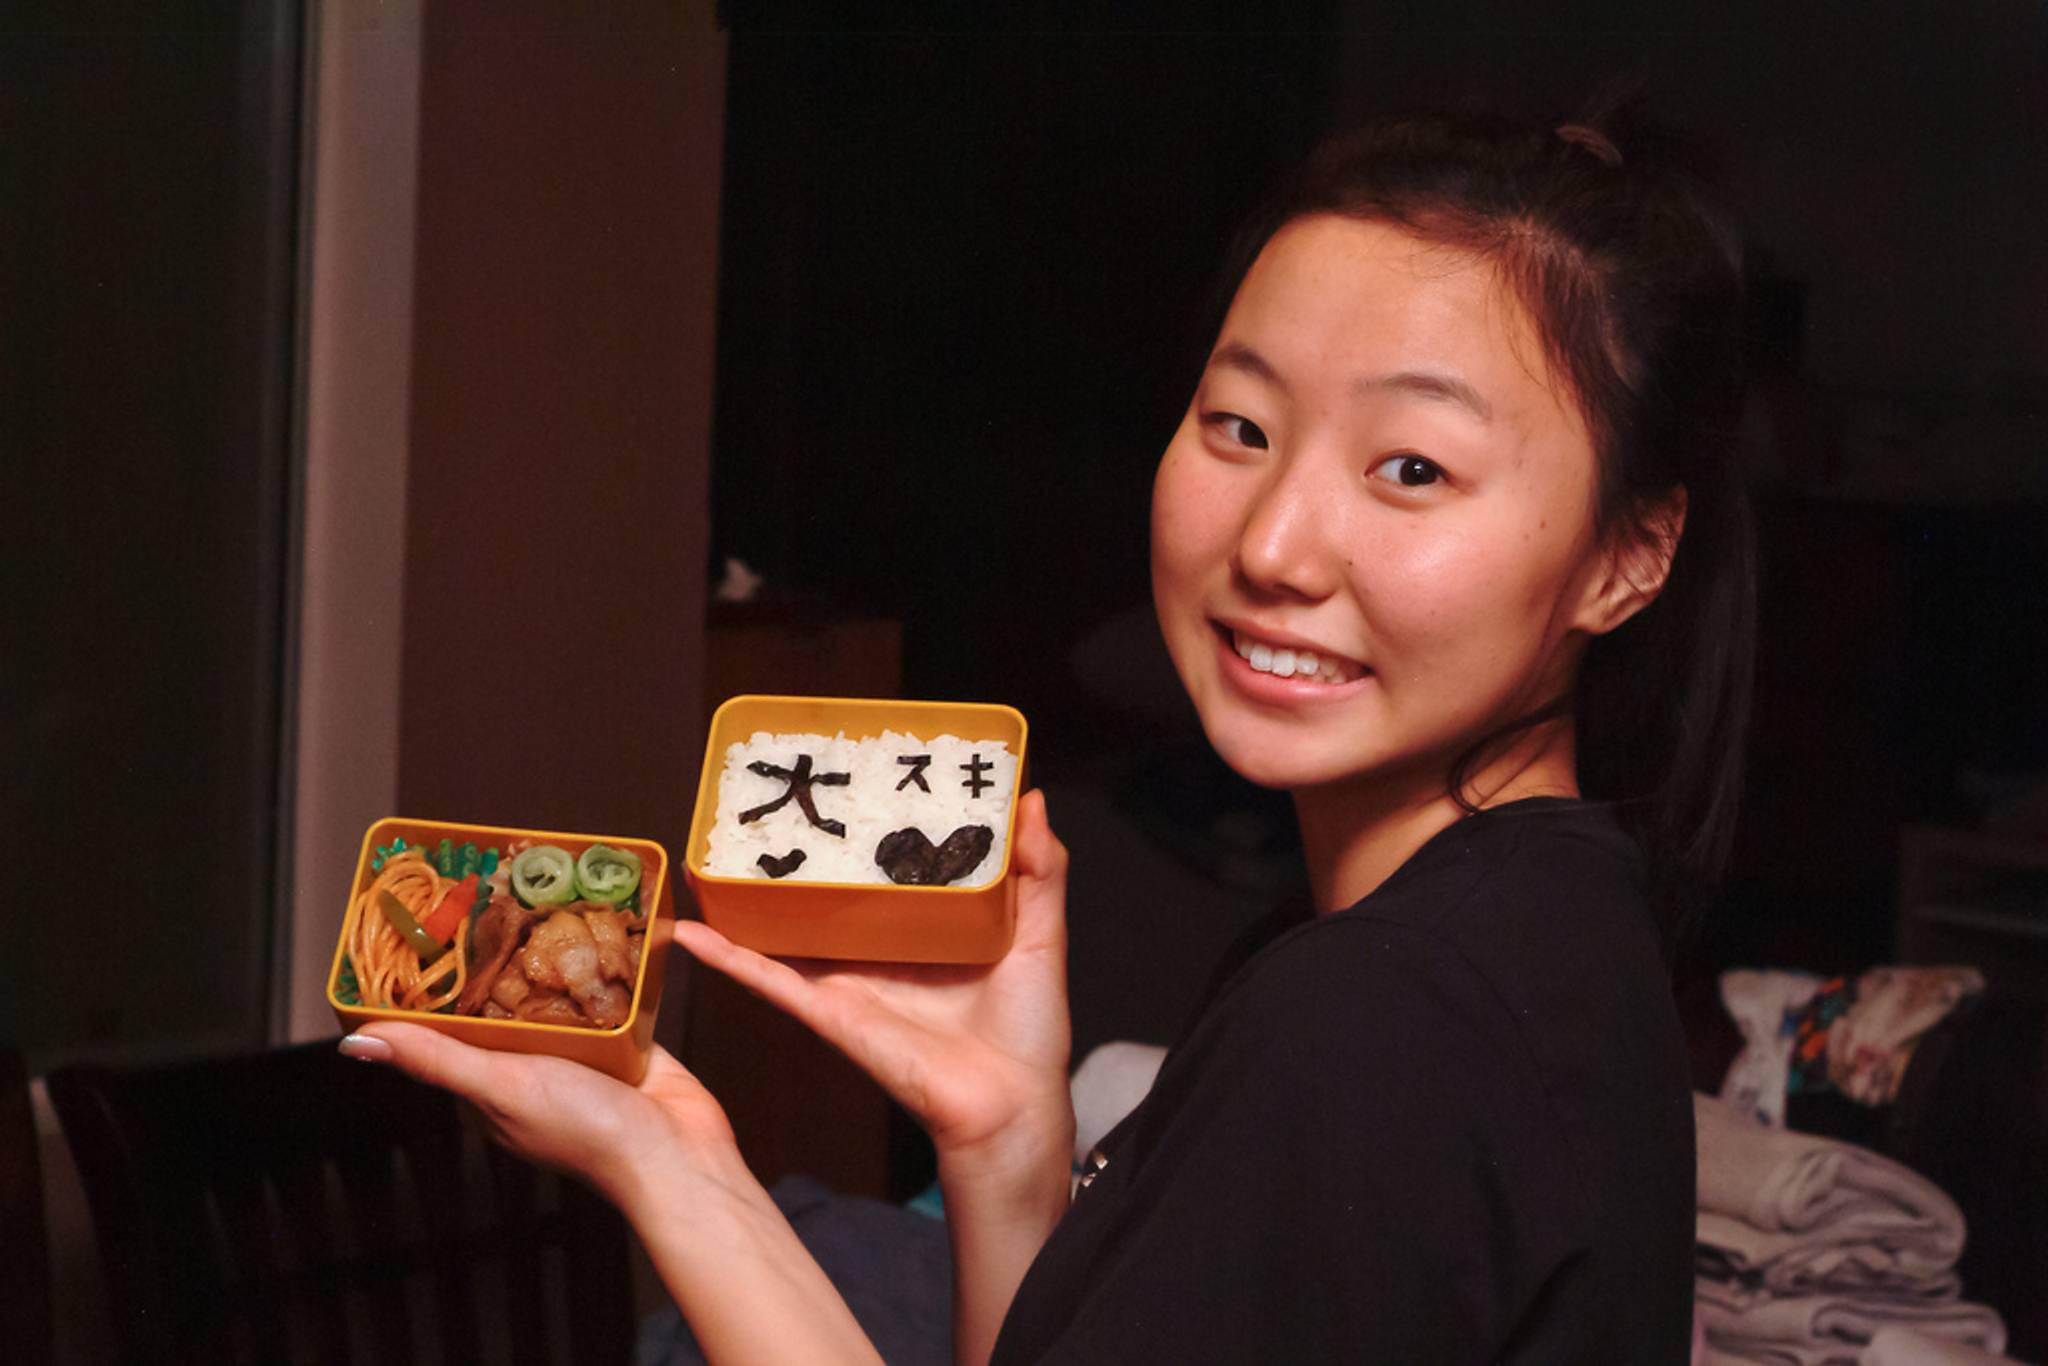 Japanese mothers spend hours making lunch boxes